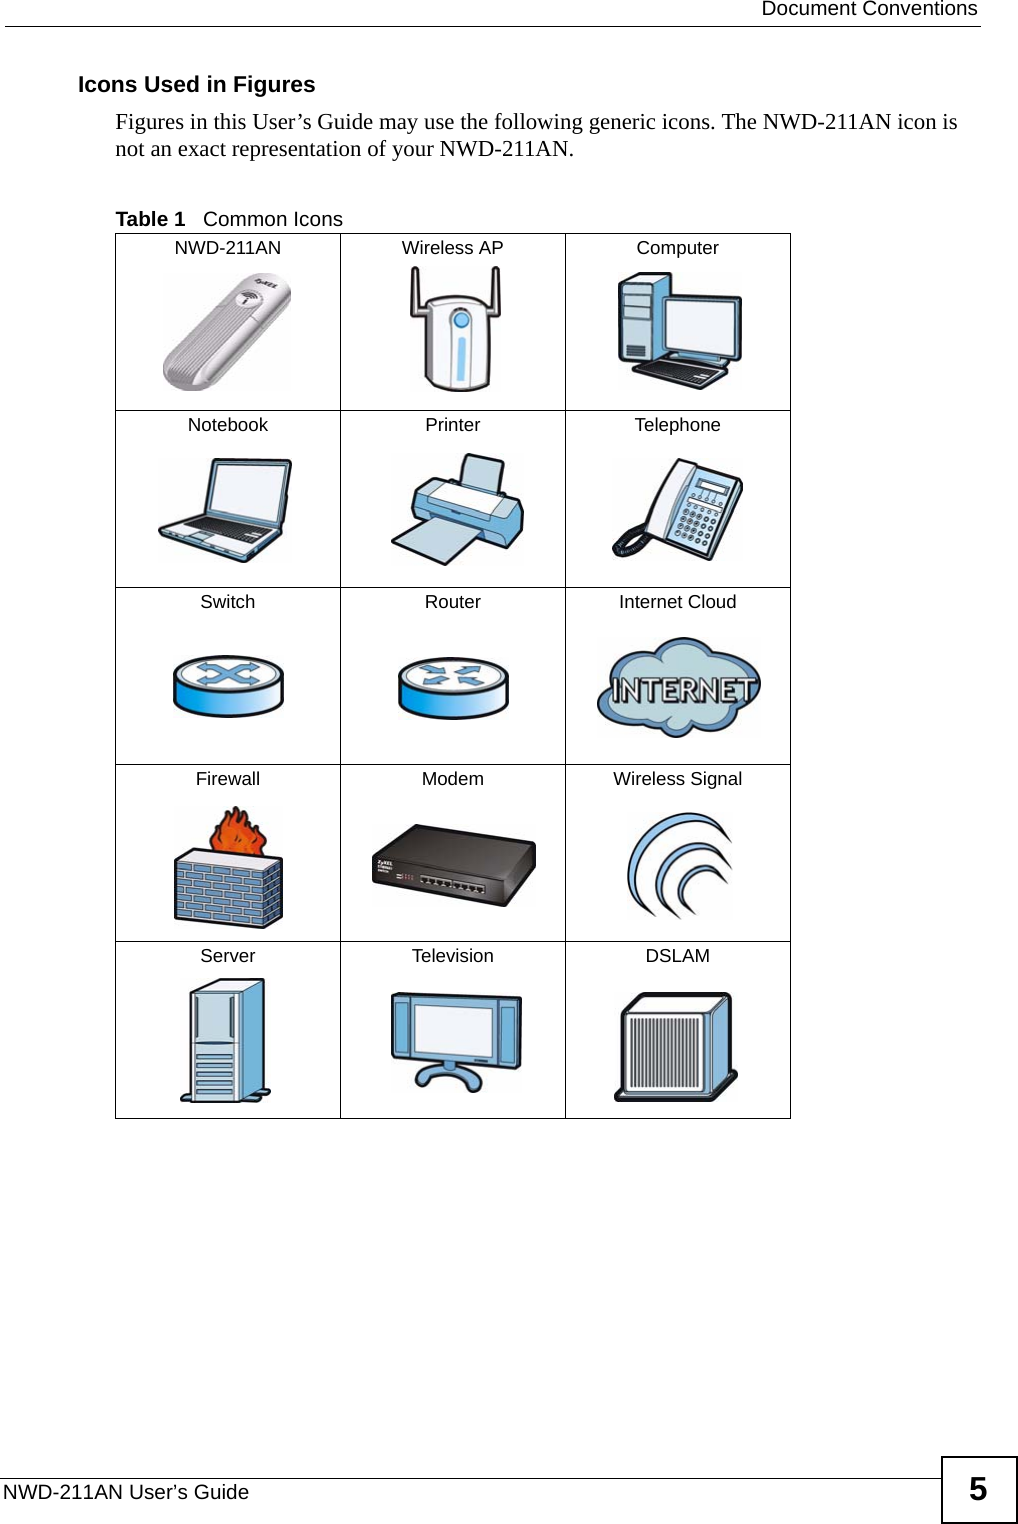  Document ConventionsNWD-211AN User’s Guide 5Icons Used in FiguresFigures in this User’s Guide may use the following generic icons. The NWD-211AN icon is not an exact representation of your NWD-211AN.Table 1   Common IconsNWD-211AN Wireless AP ComputerNotebook Printer TelephoneSwitch Router Internet CloudFirewall Modem Wireless SignalServer Television DSLAM